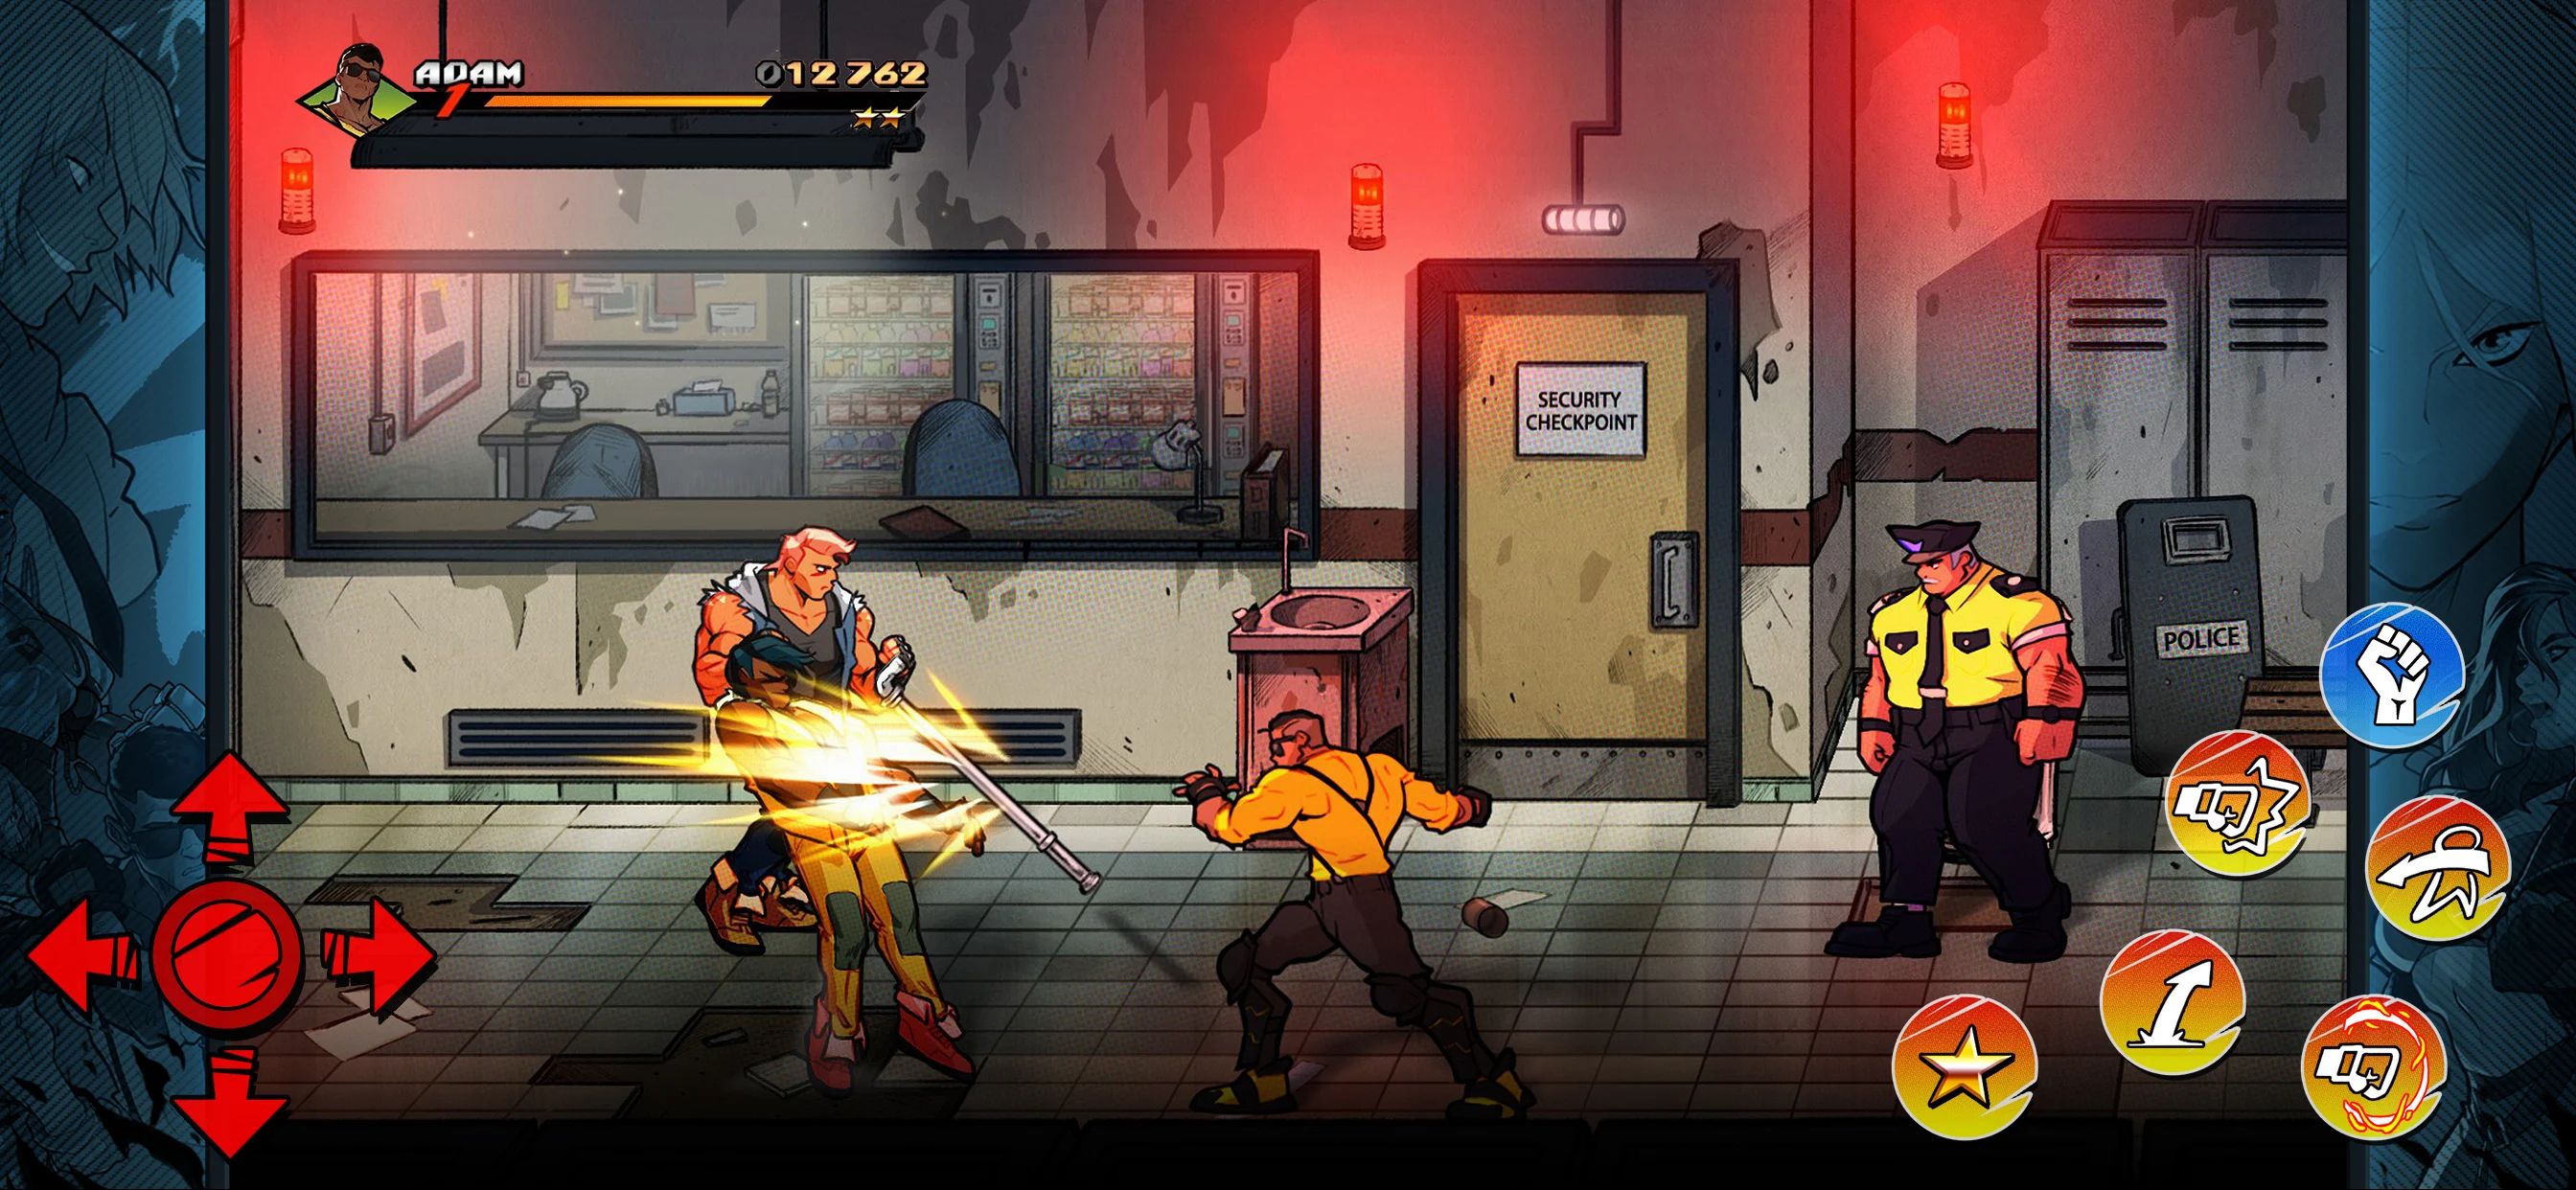 best-beat-em-up-games-streets-of-rage-4-security-checkpoint